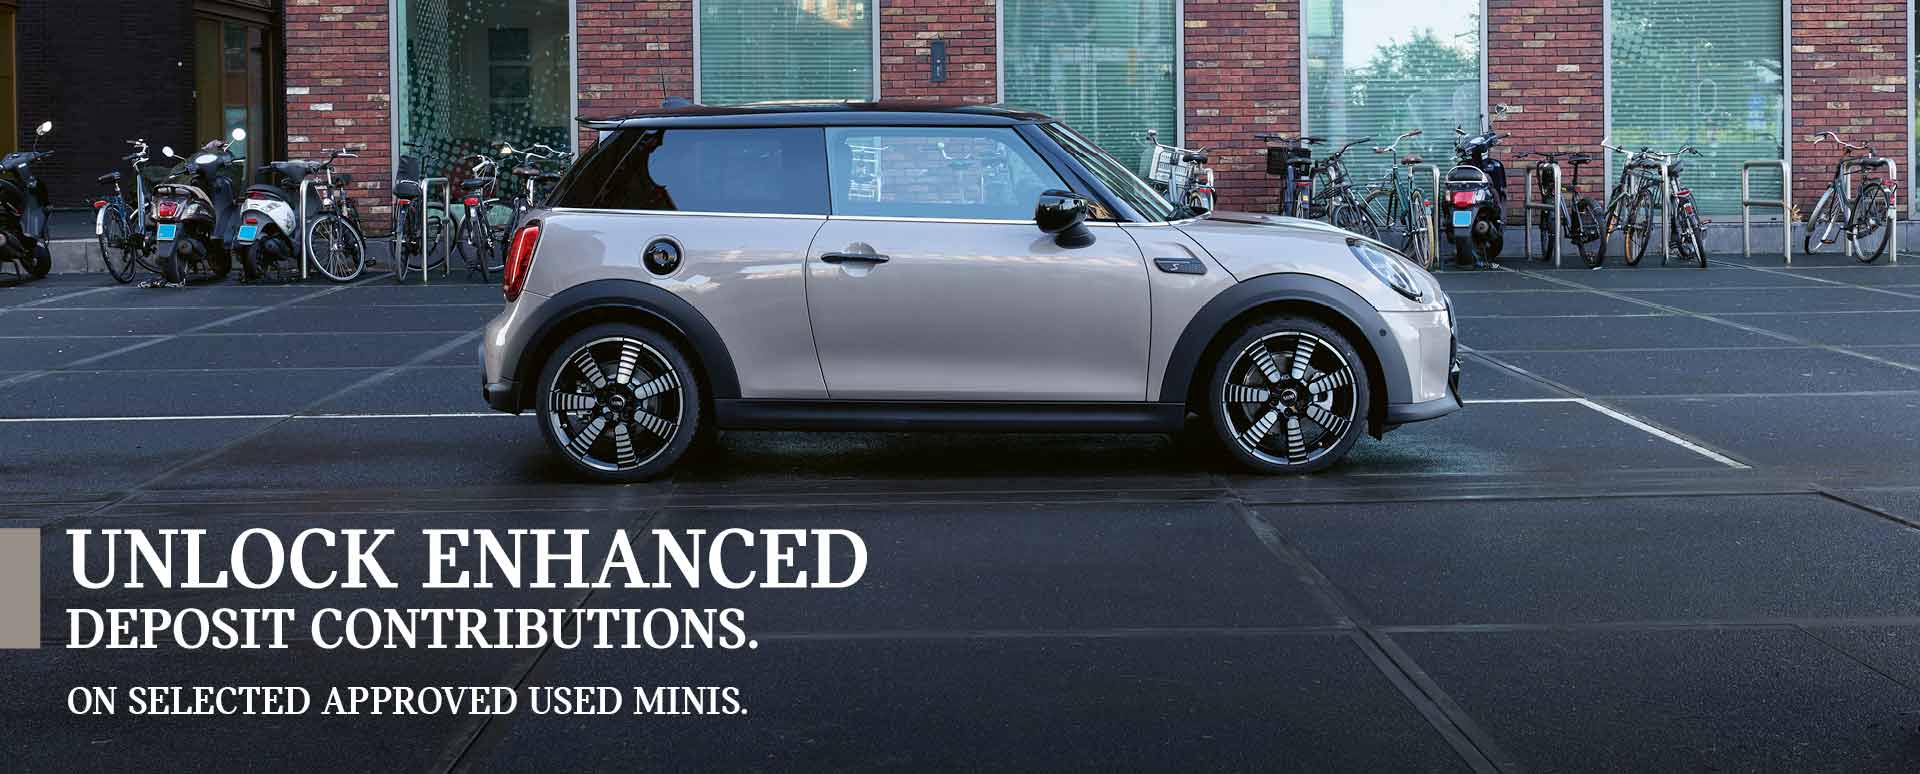 MINI Approved Used Deposit Contribution